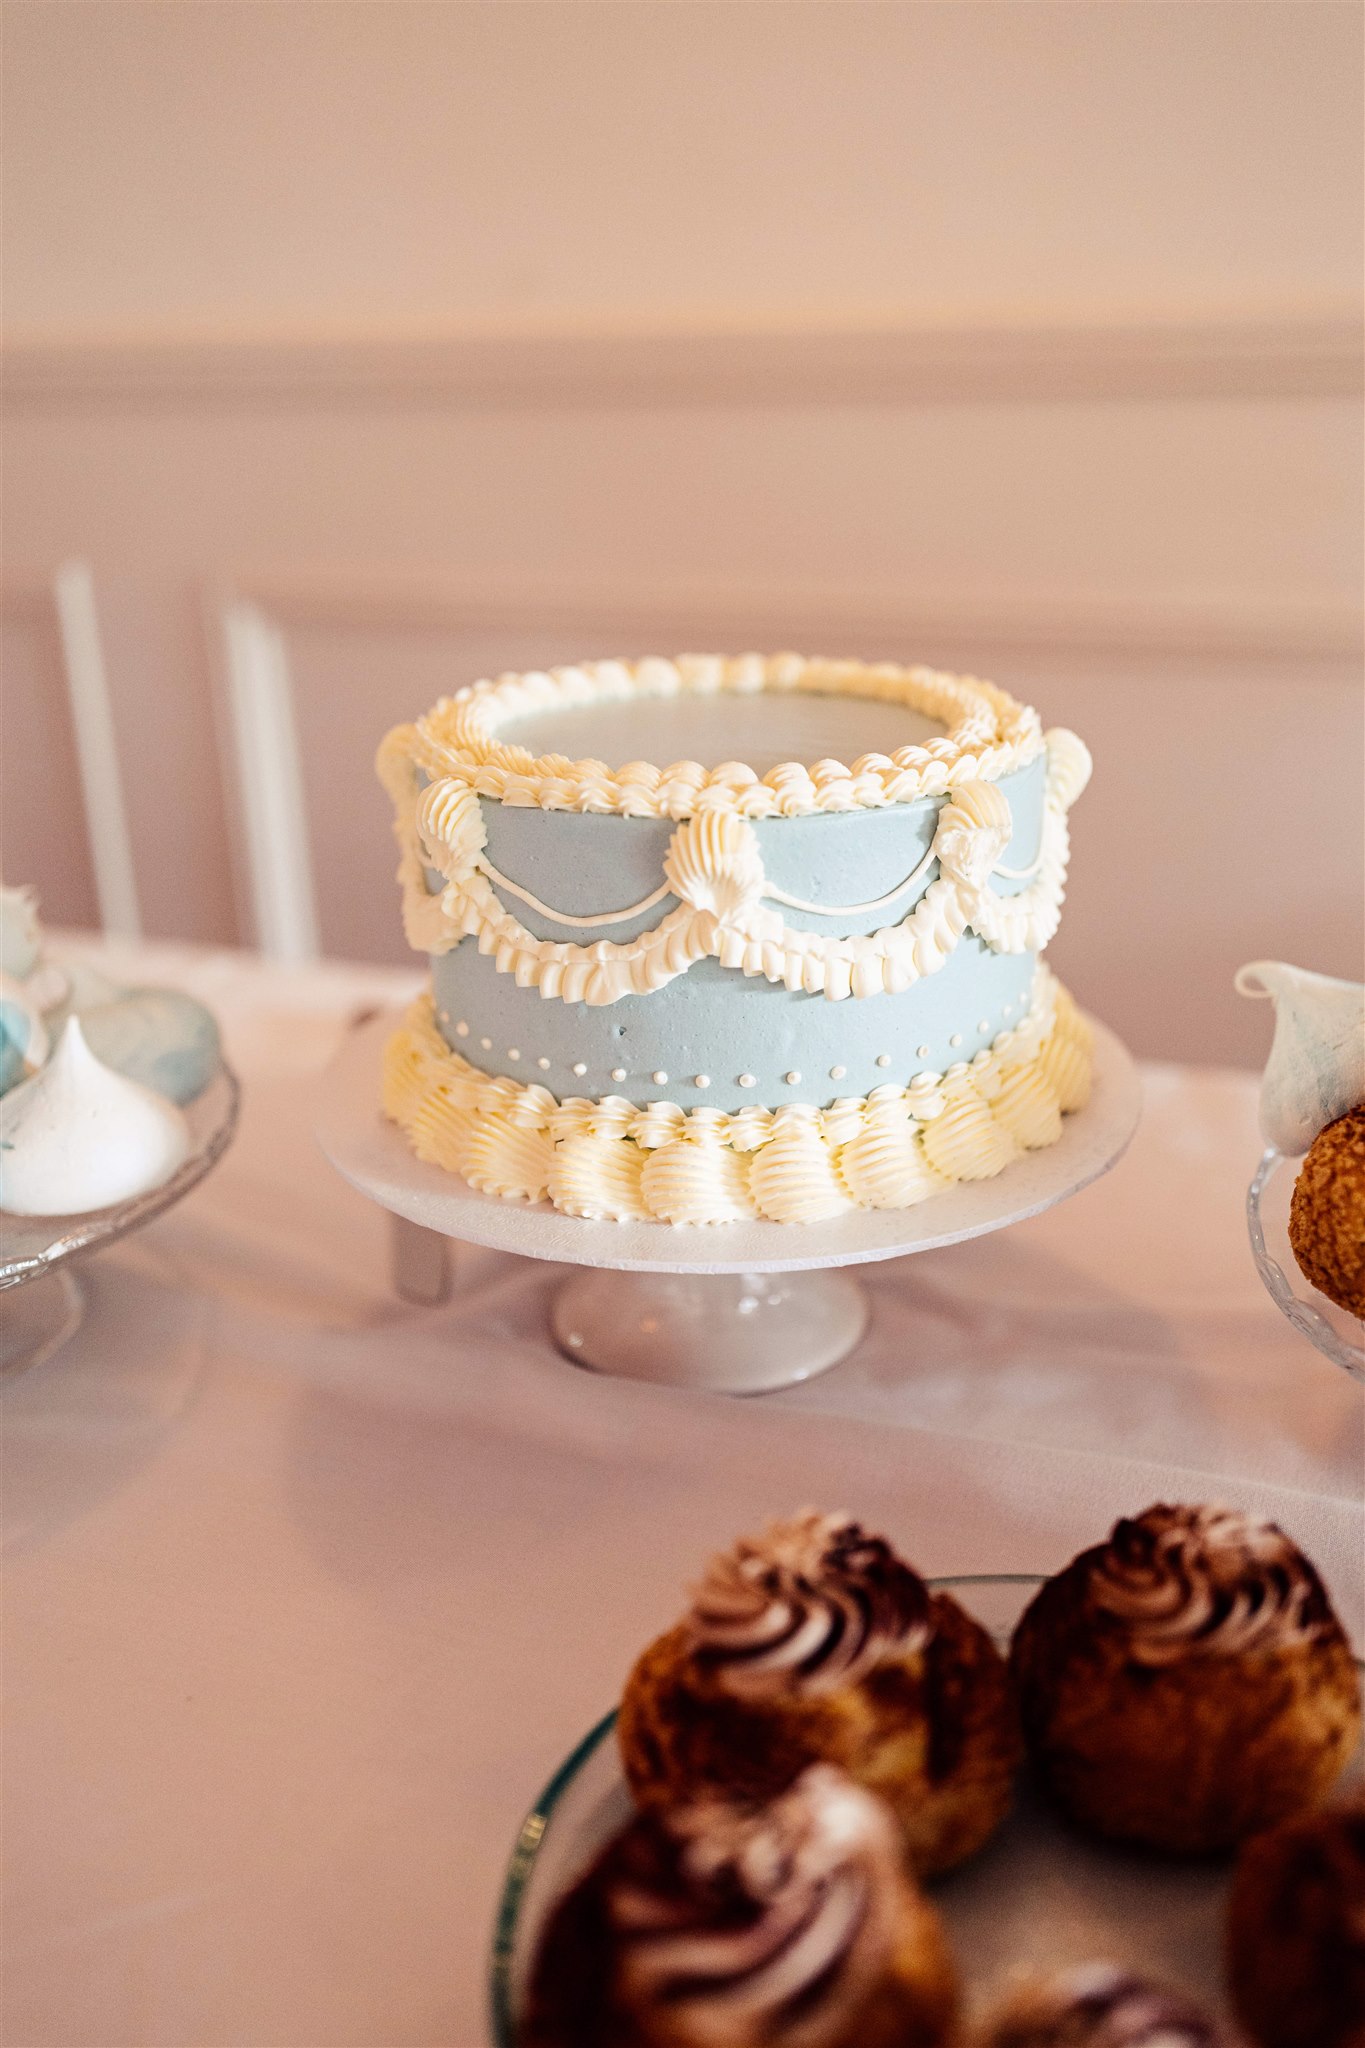 A blue and white elaborately iced wedding cake sits proudly on a table at a wedding